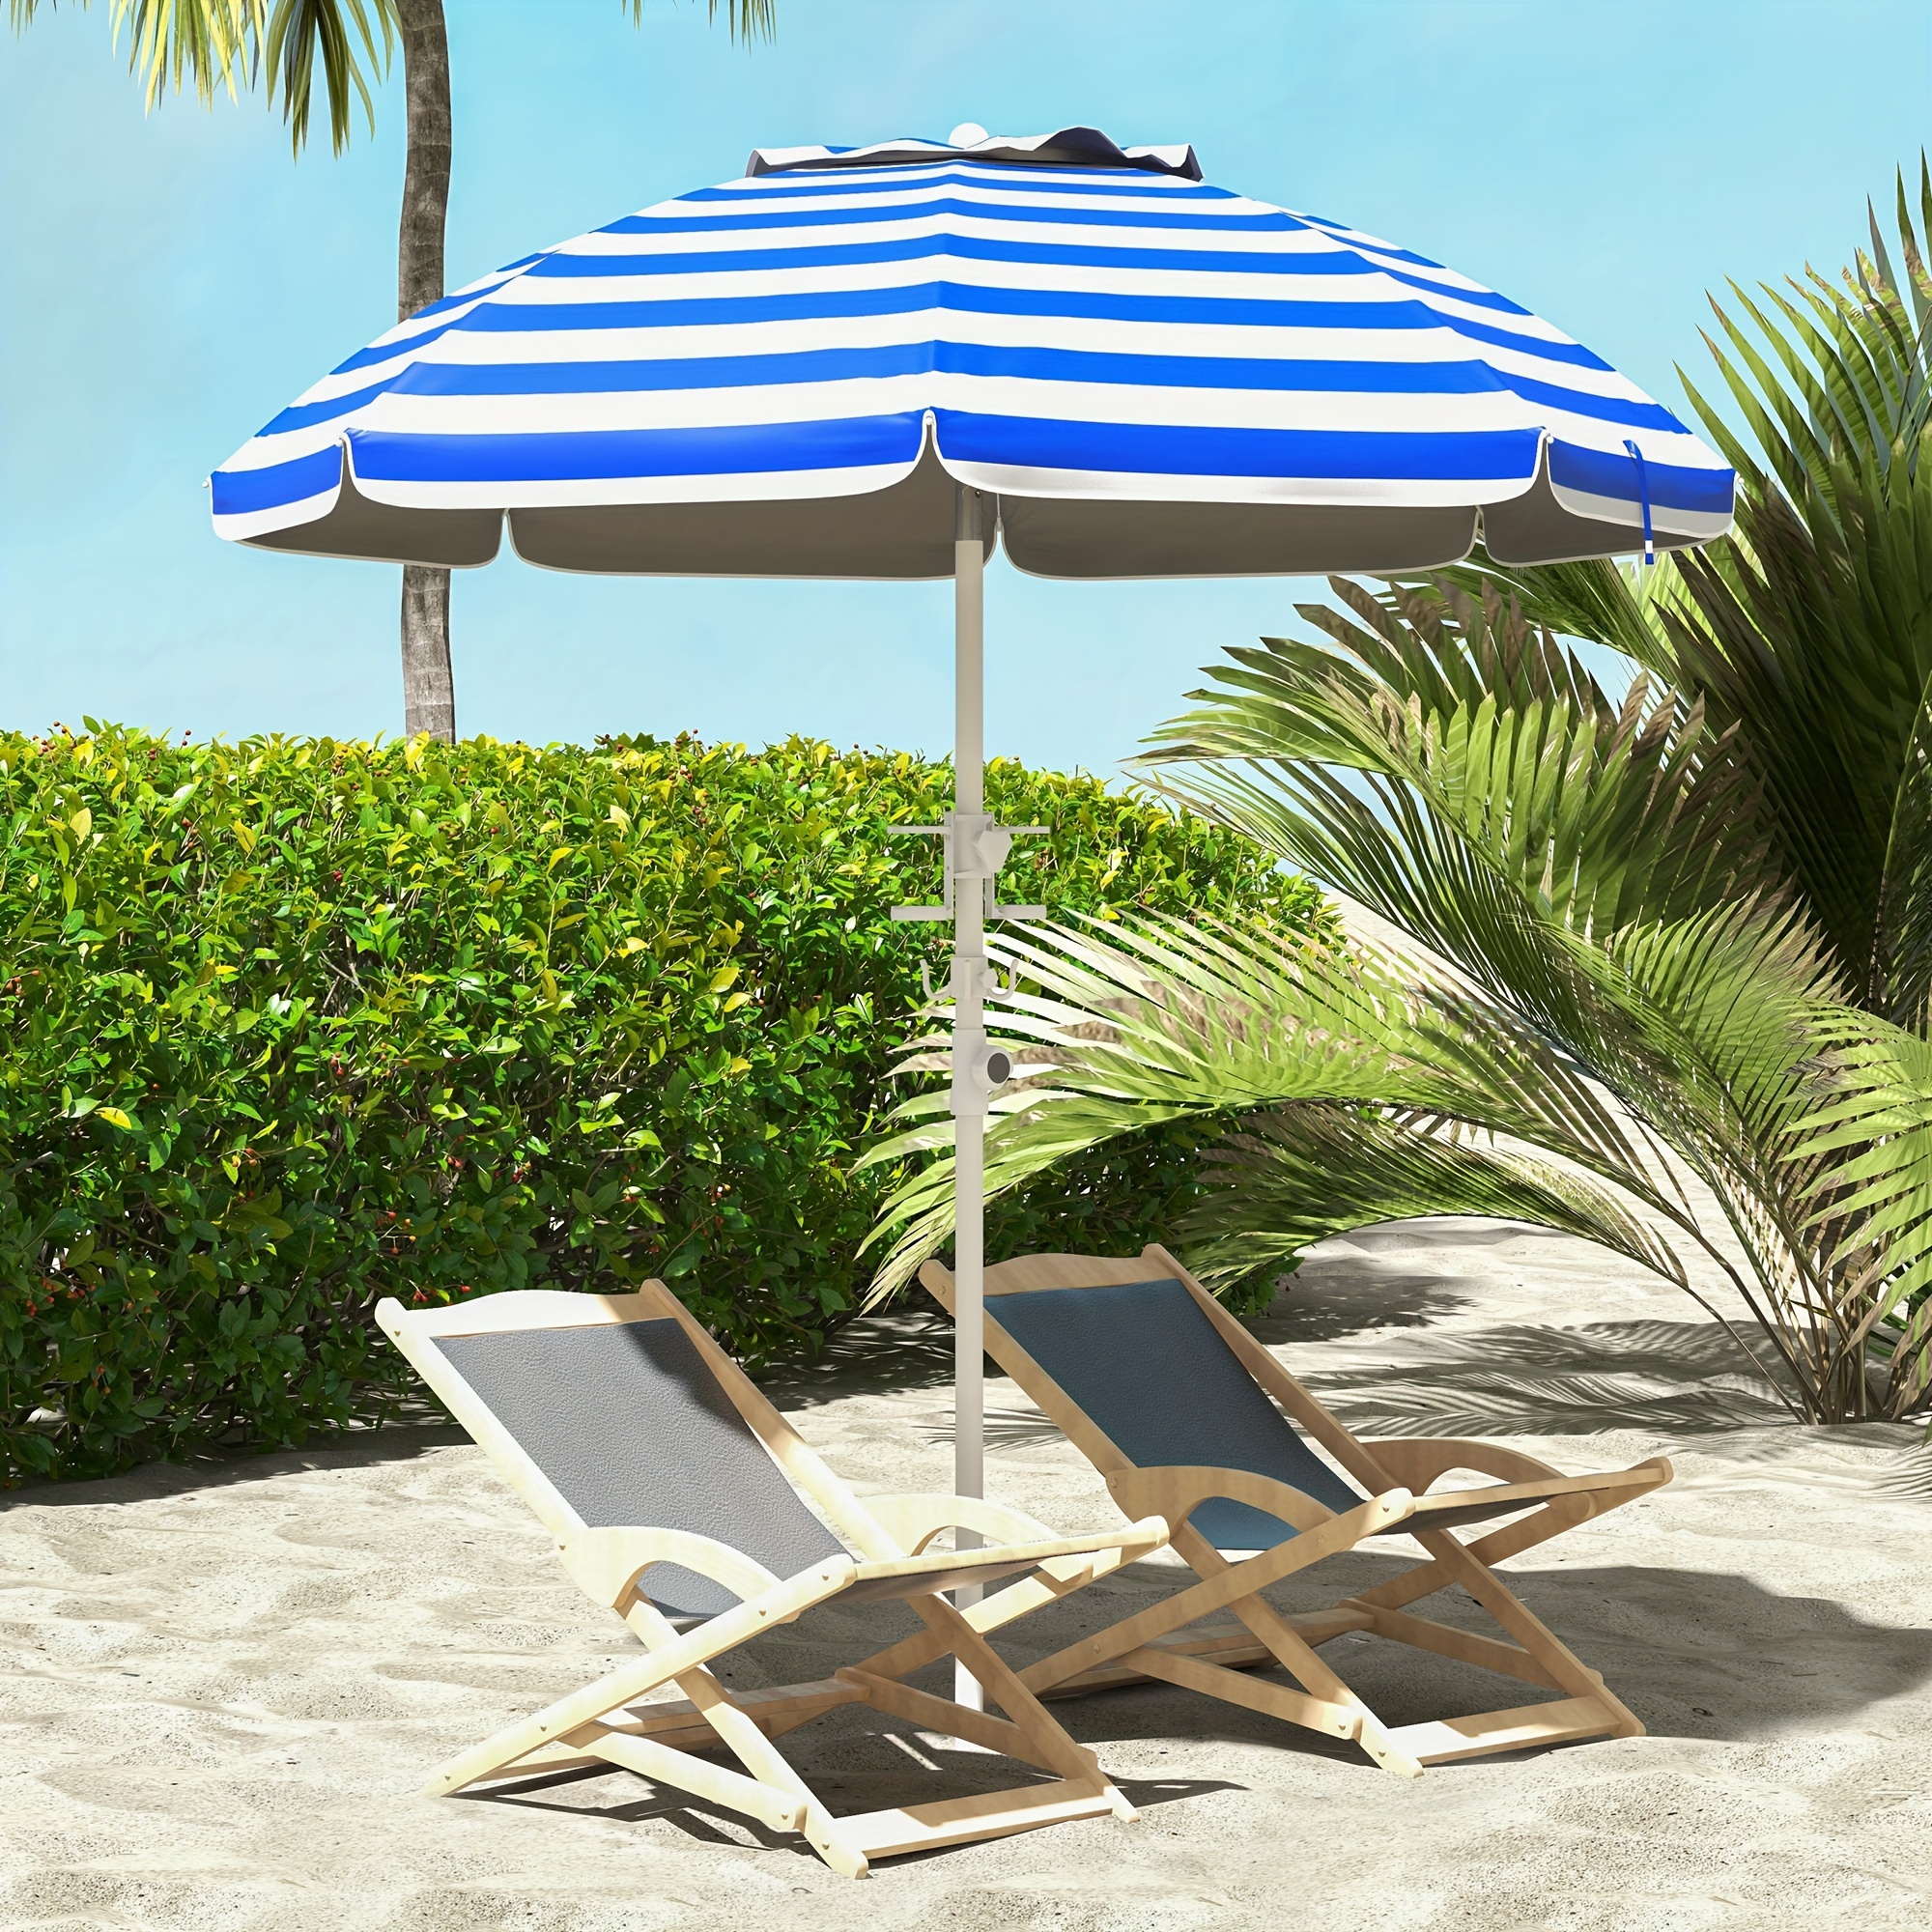 

Outsunny 5.7' Portable Beach Umbrella With Tilt, Adjustable Height, 2 Cup Holders & Hooks, Uv 40+ Outdoor Umbrella With Vented Canopy, Blue White Stripe